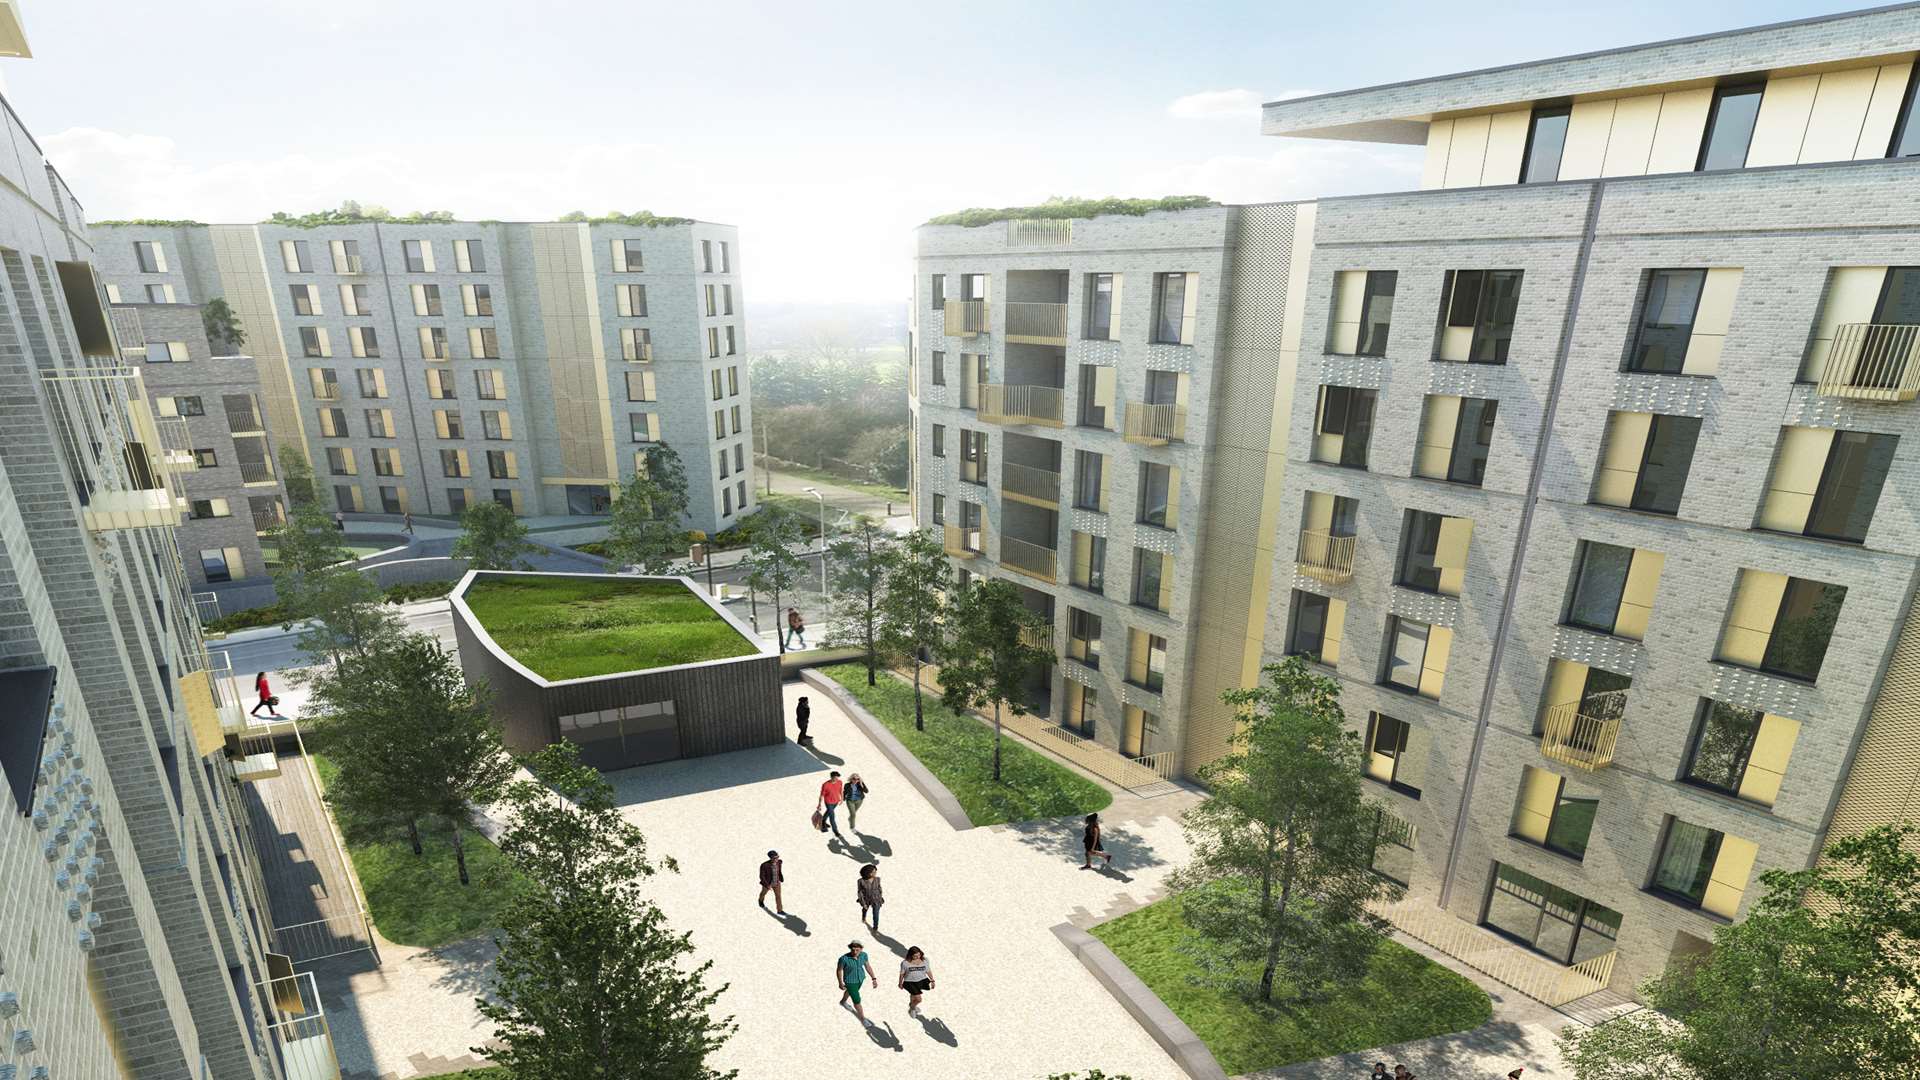 GRE Assets has spent £45 million on buying 267 flats being developed by Quinn Estates